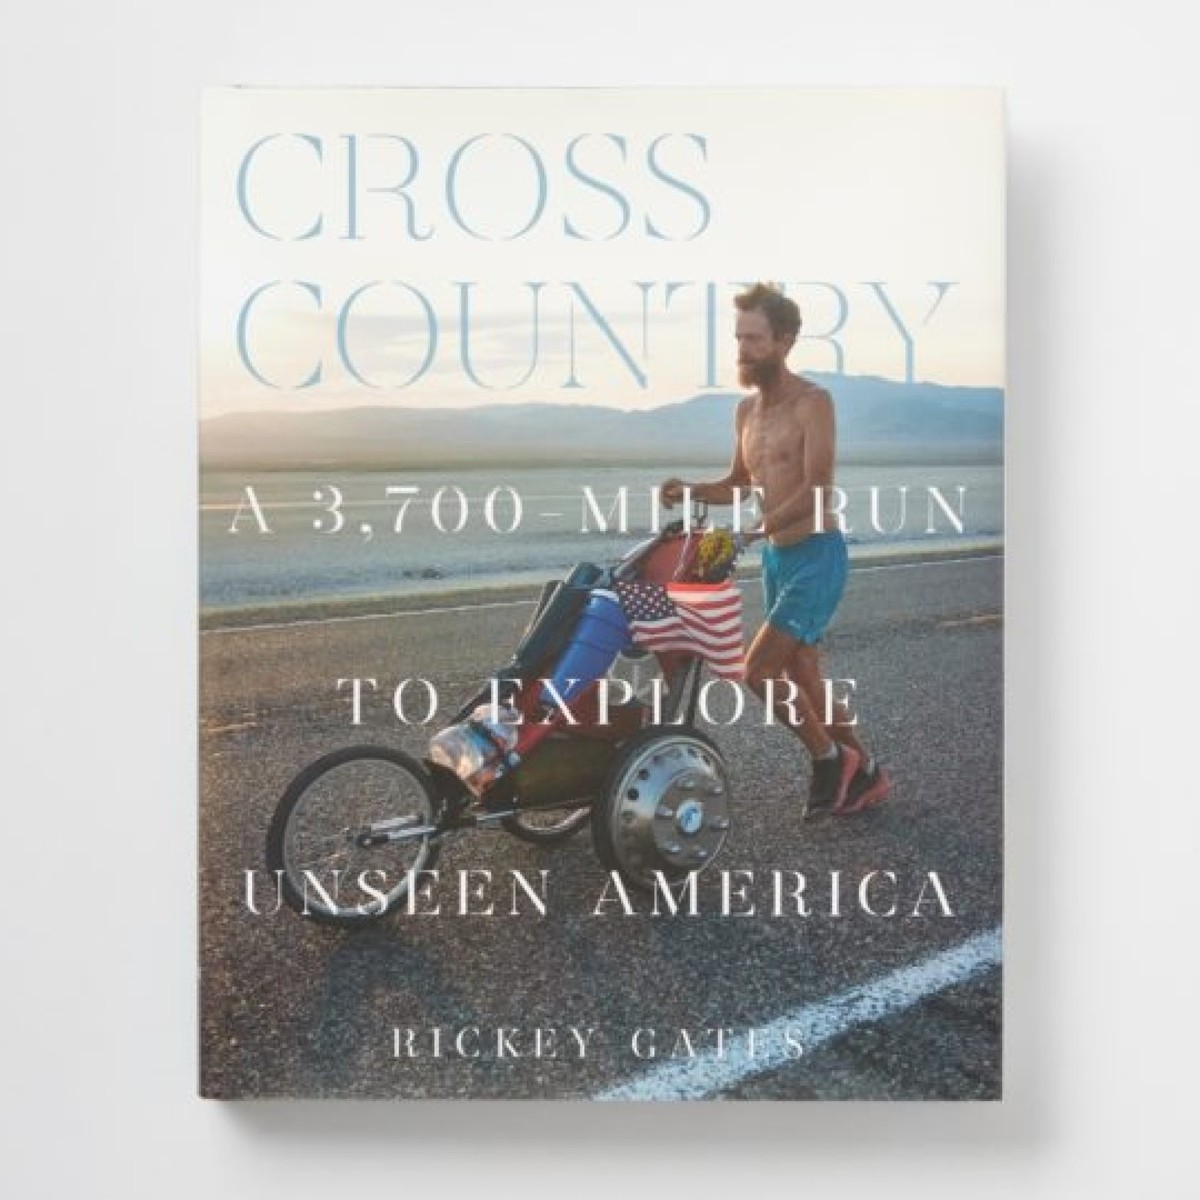 Cross Country: A 3,700-Mile Run to Explore Unseen America